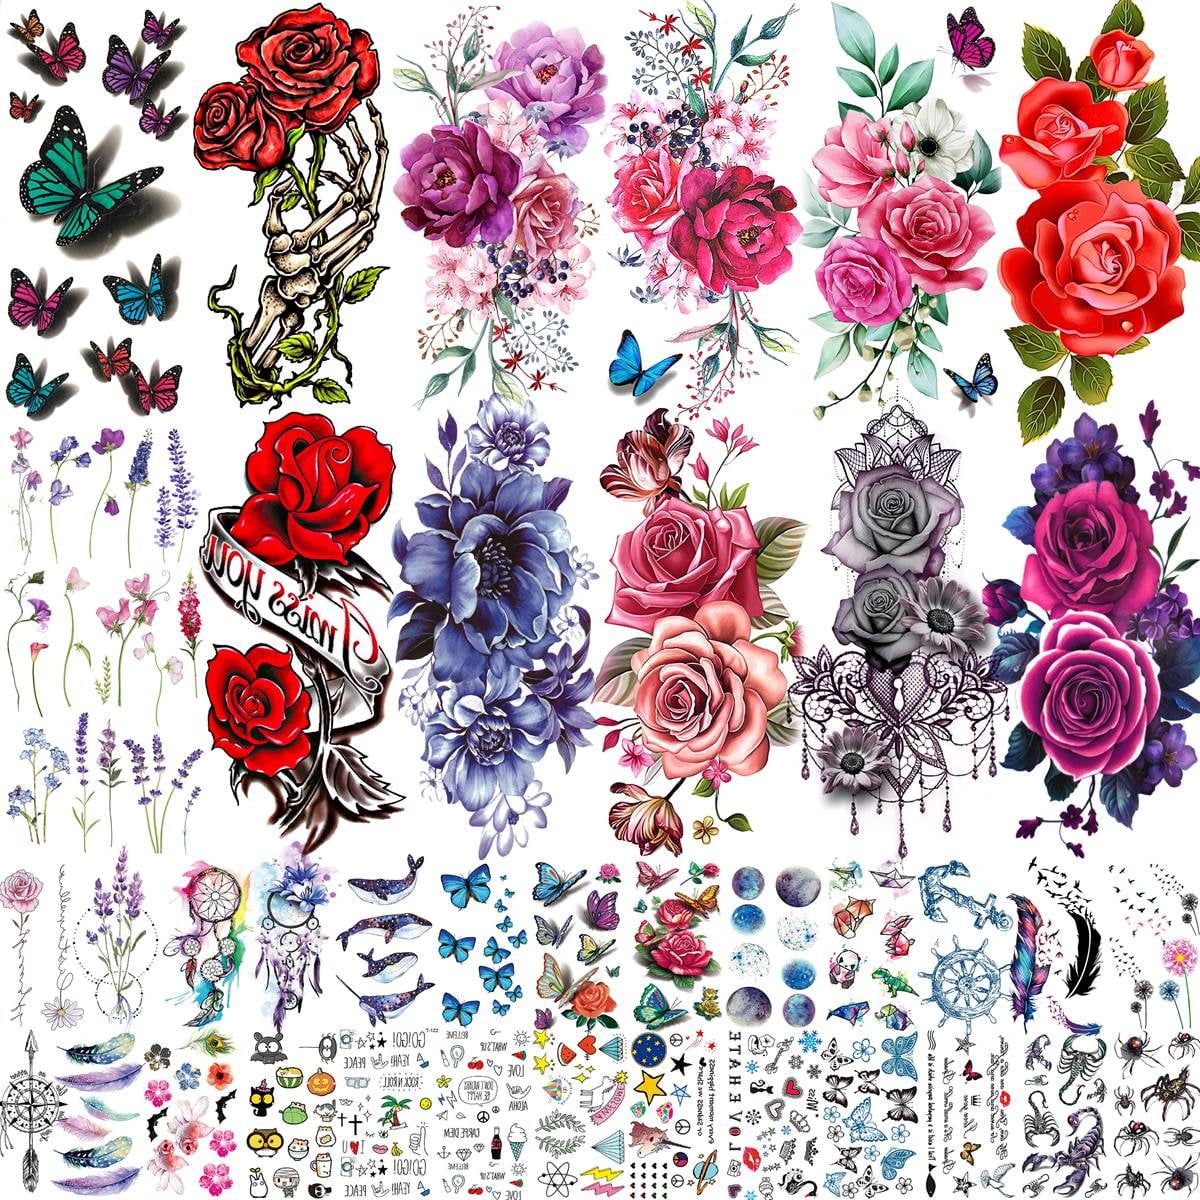 3D The Canvas Arts Temporary Tattoo Waterproof For Men Women Arm Hand  Thighs, Legs XQB-156 (Rose Tattoo) Size 21X12 cm : Amazon.in: Beauty